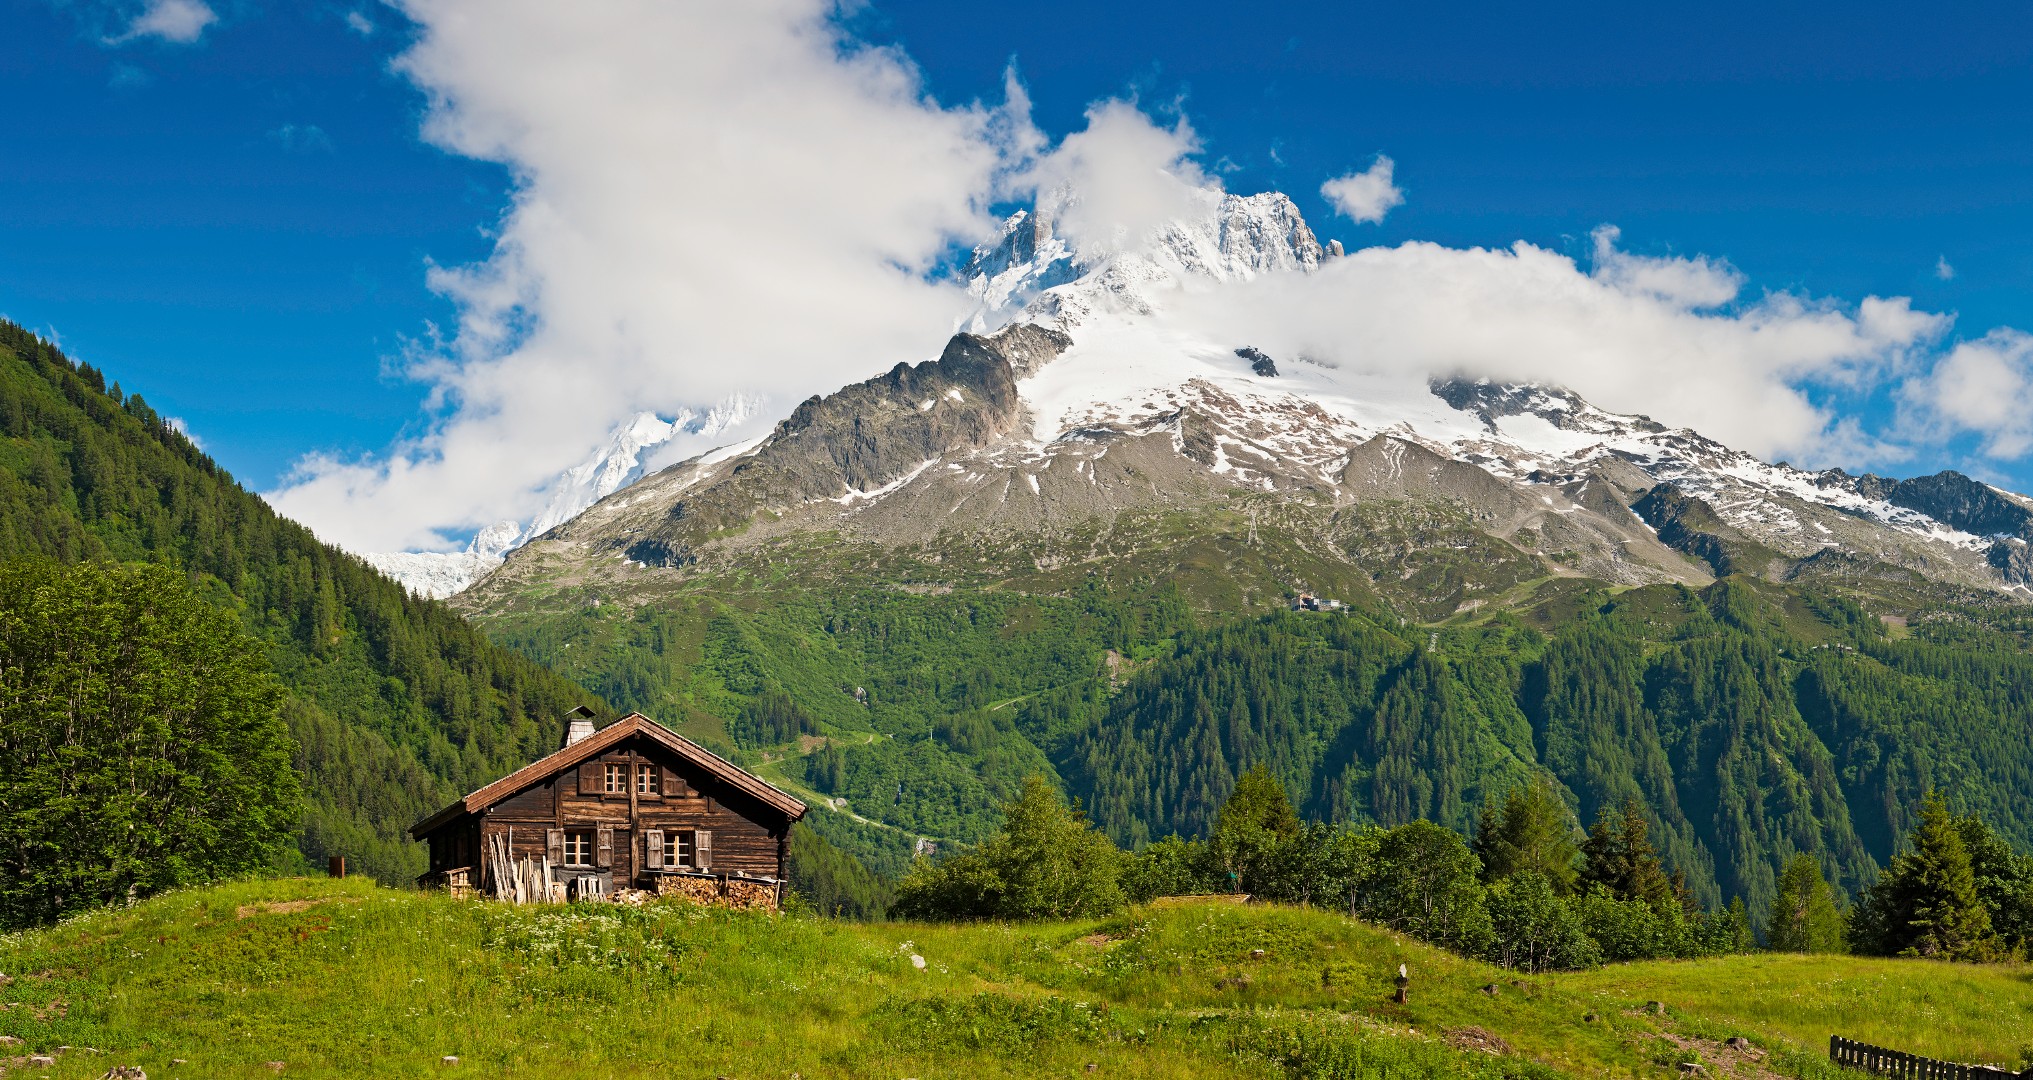 rent holiday houses and apartments in French Alps - holiday in French Alps